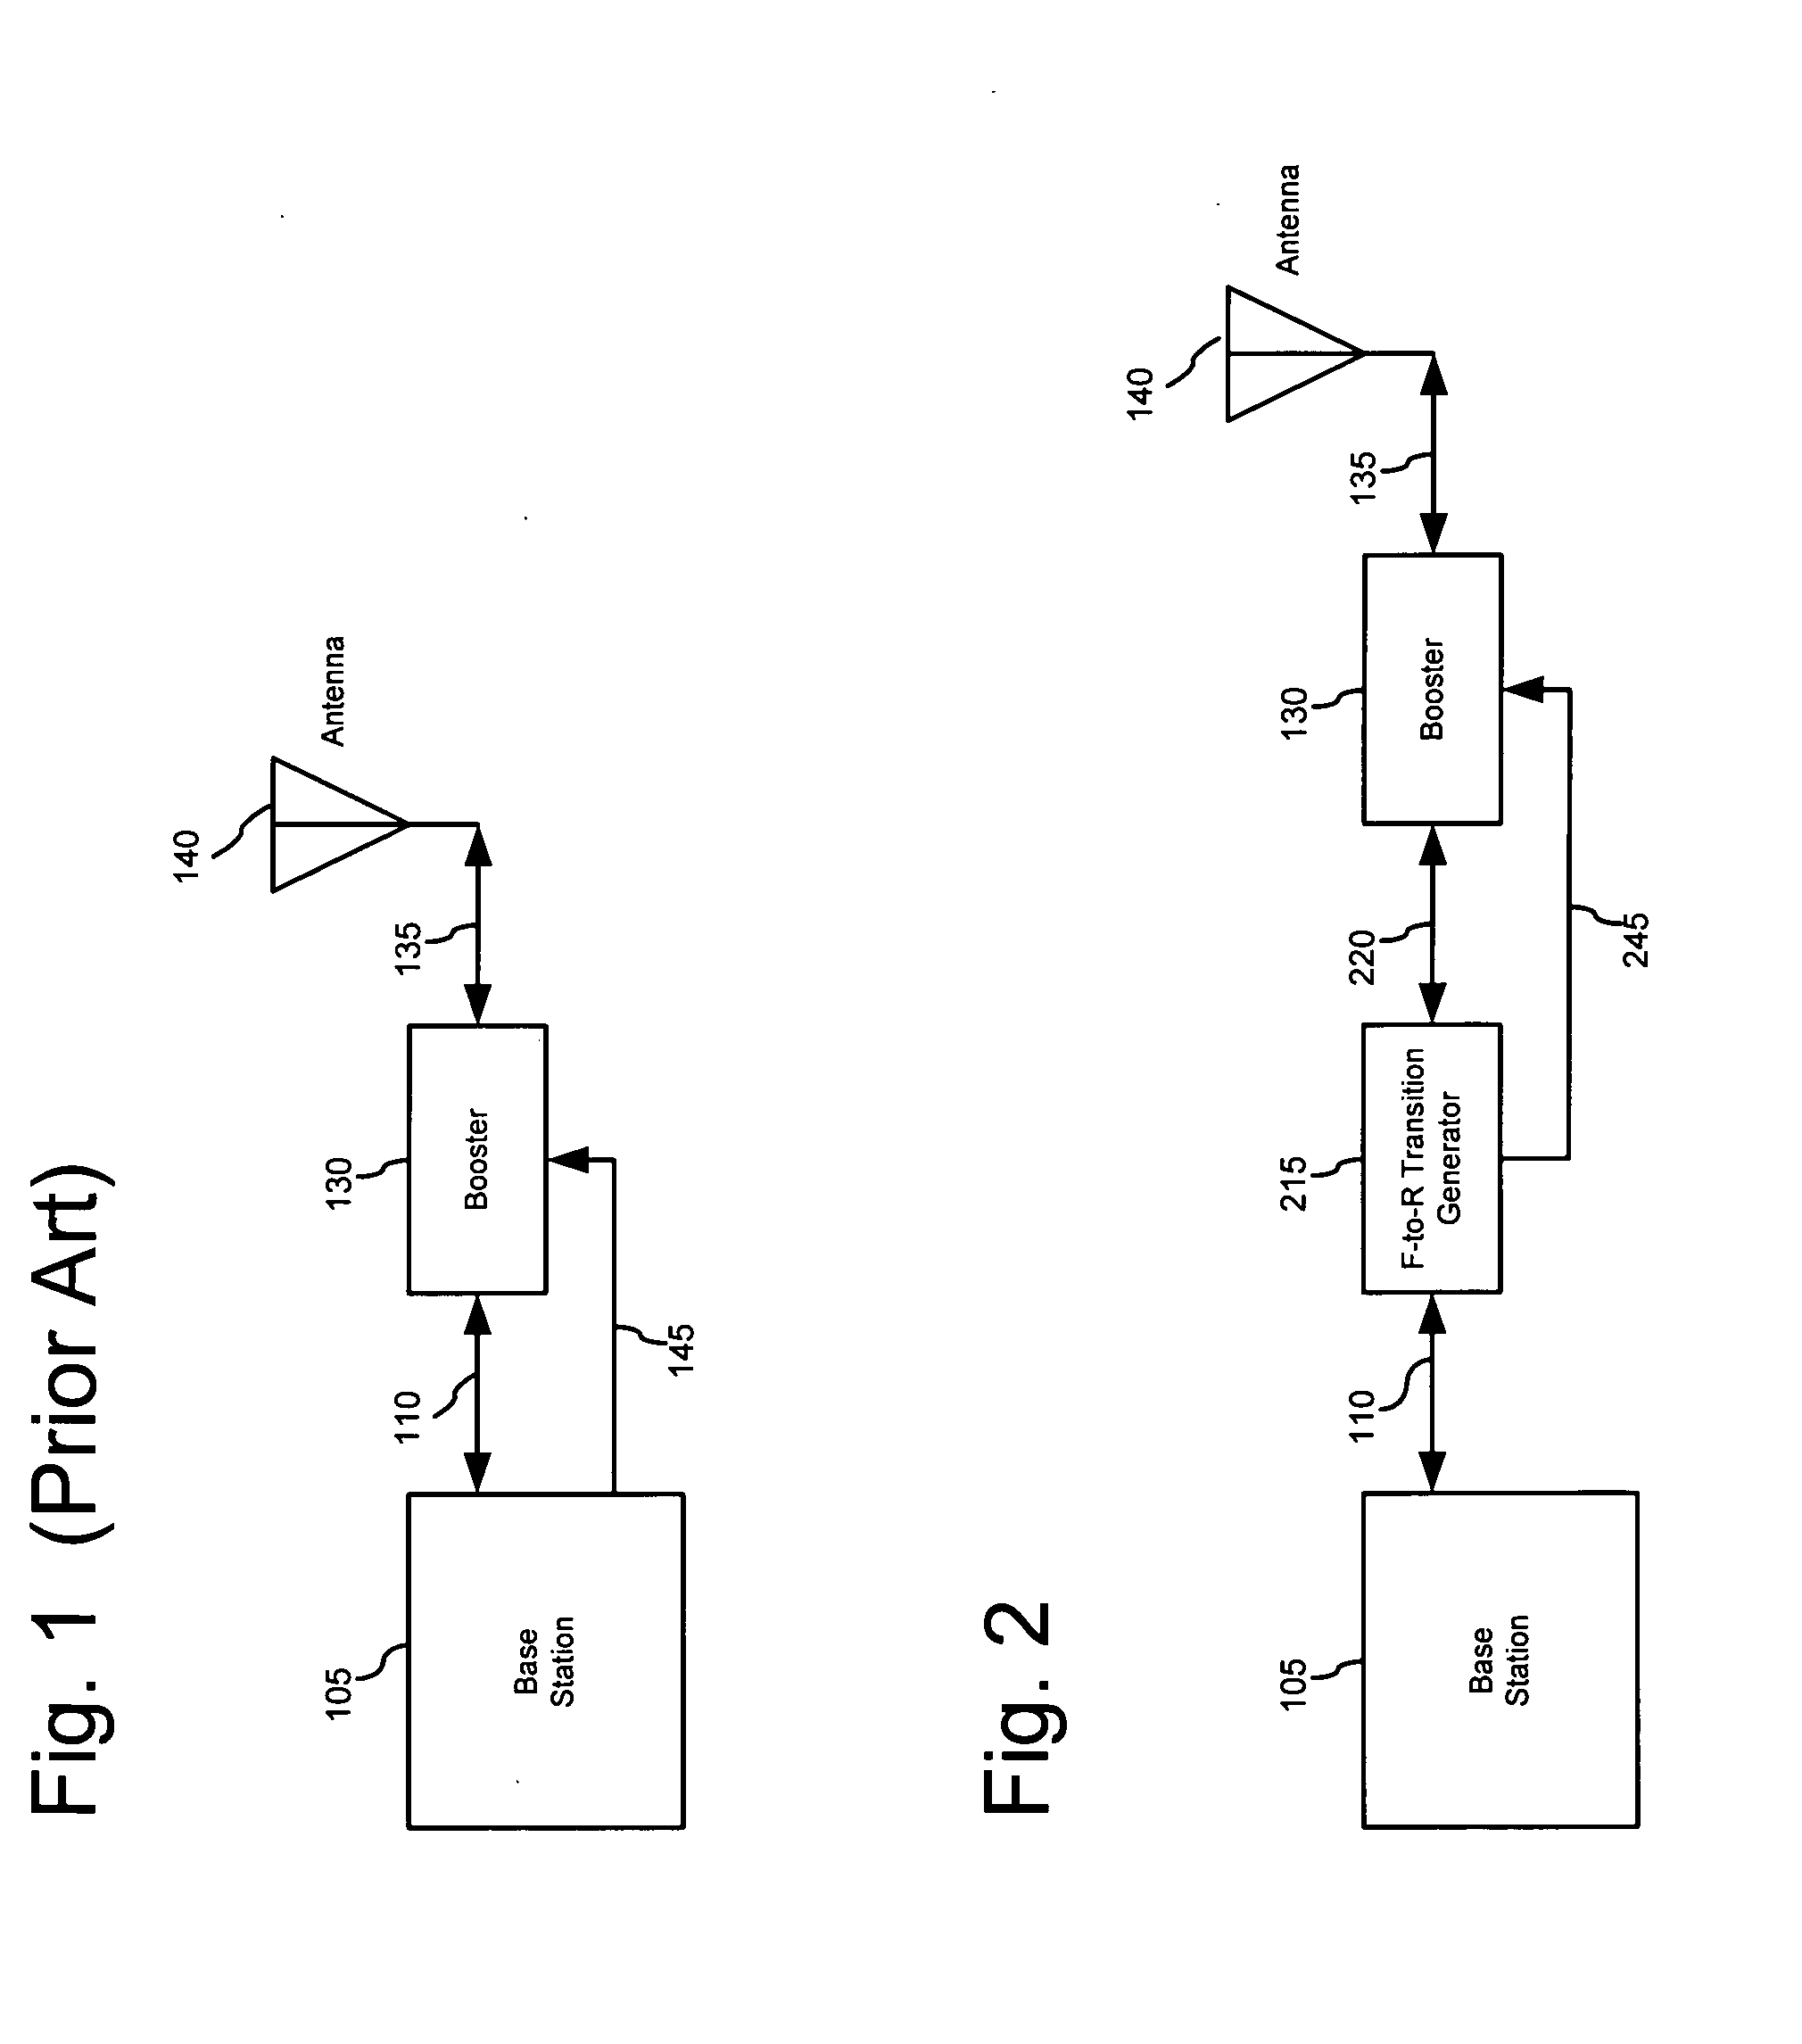 Time division duplex forward-to-reverse transition signal generator